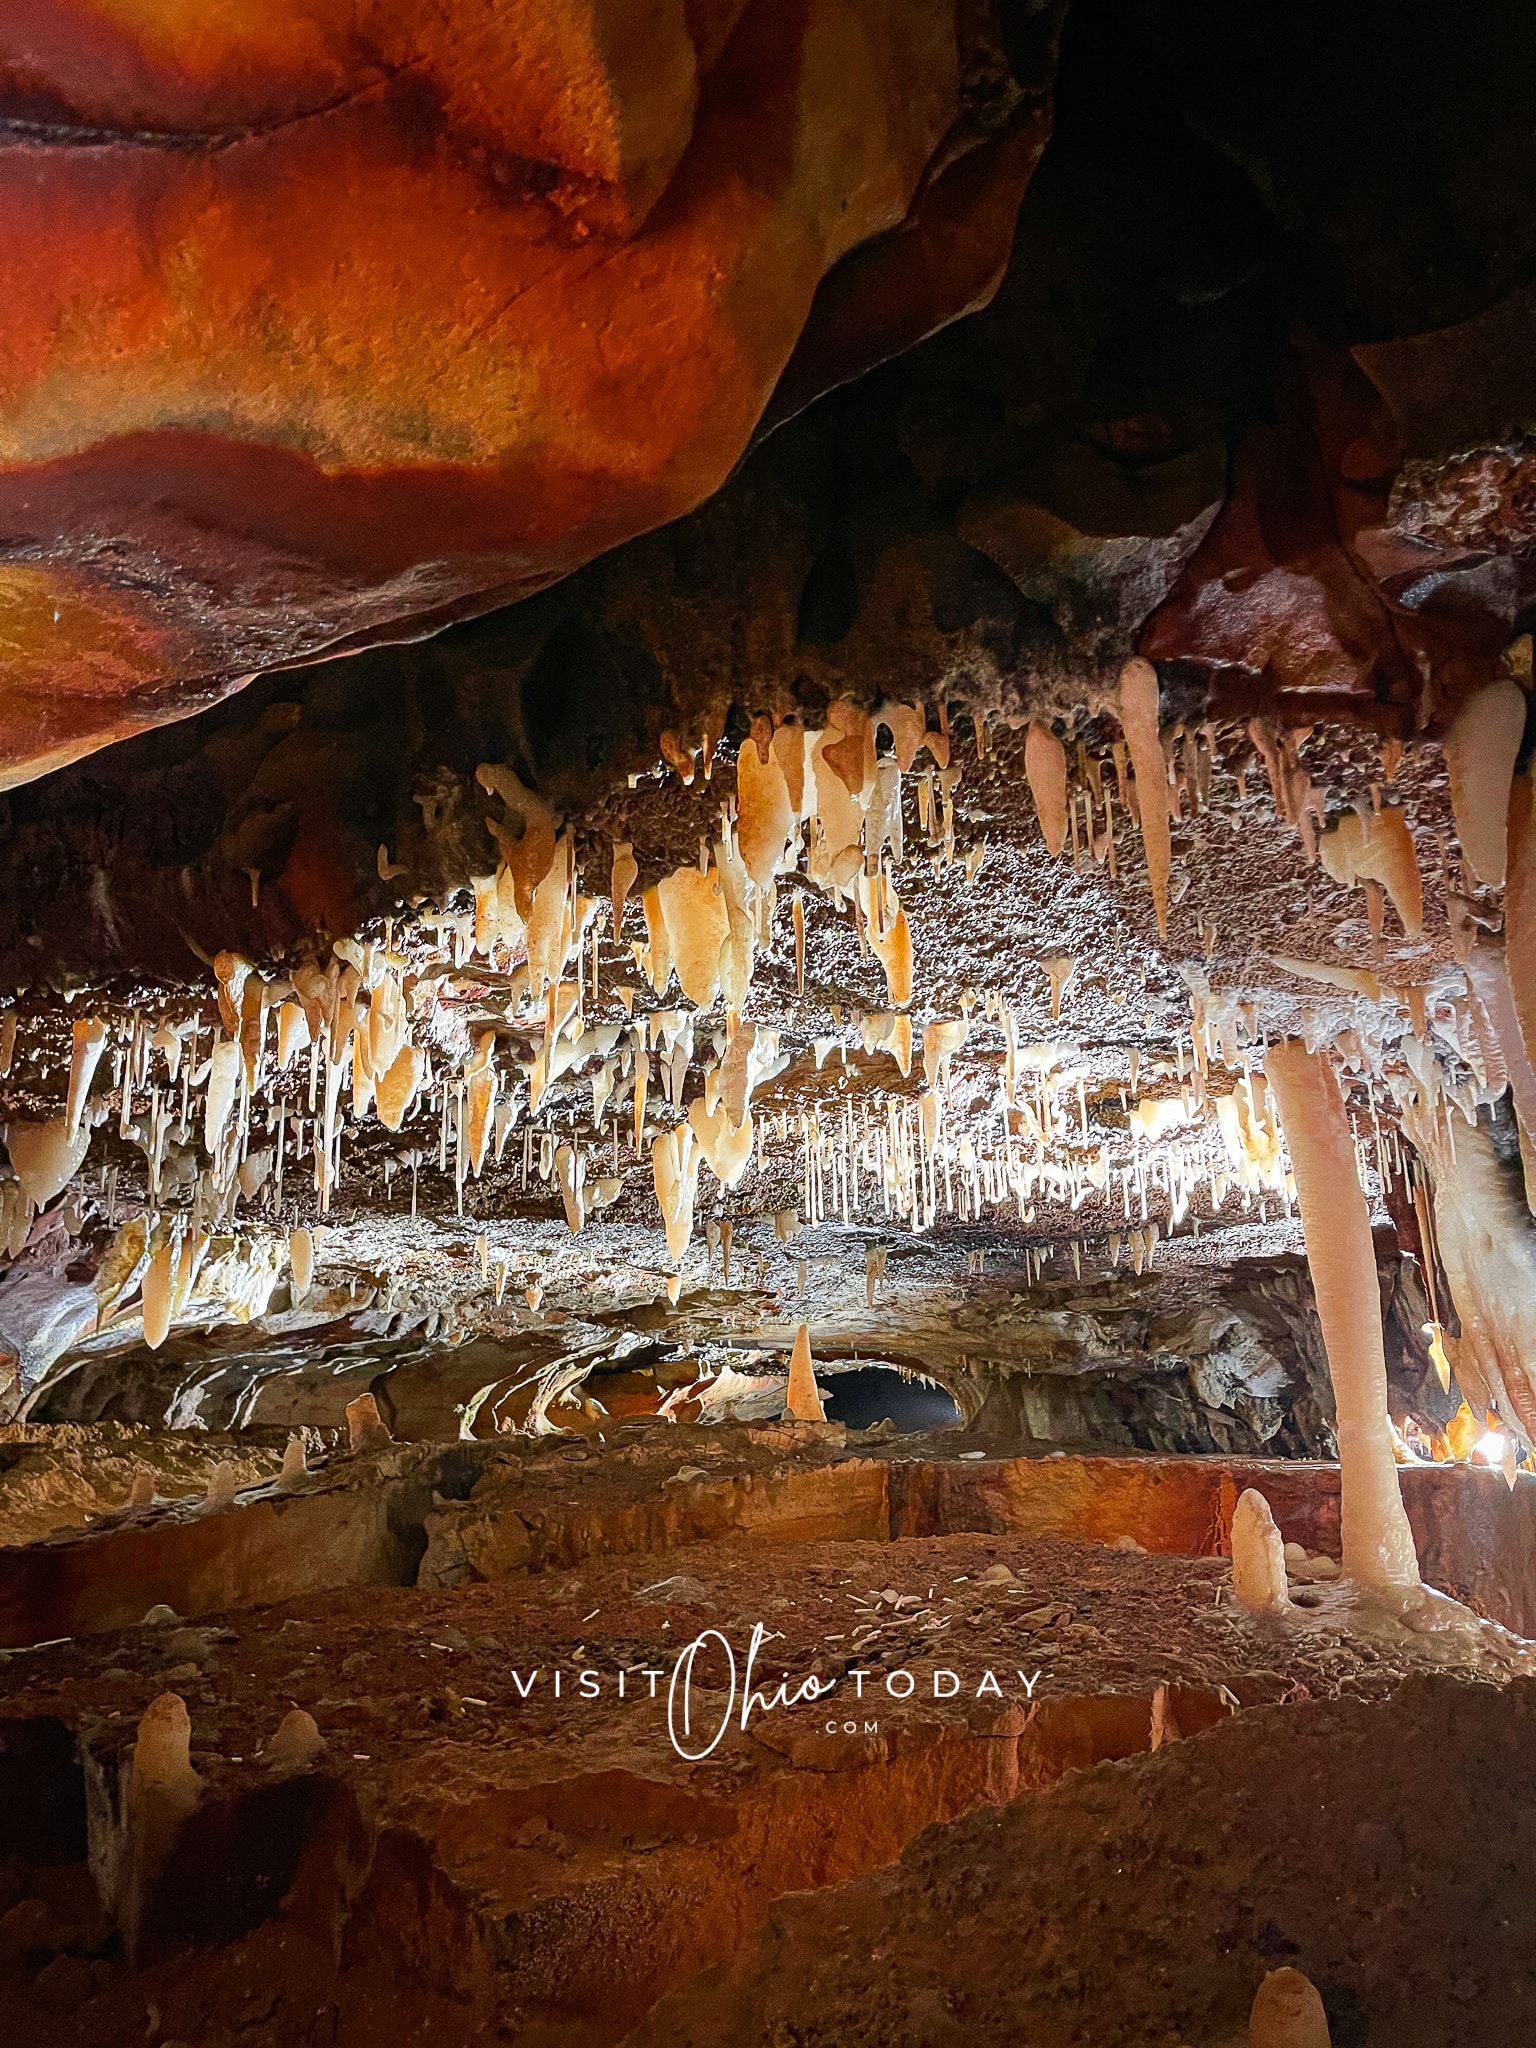 A photo of stalagmites and stalactites inside a cave